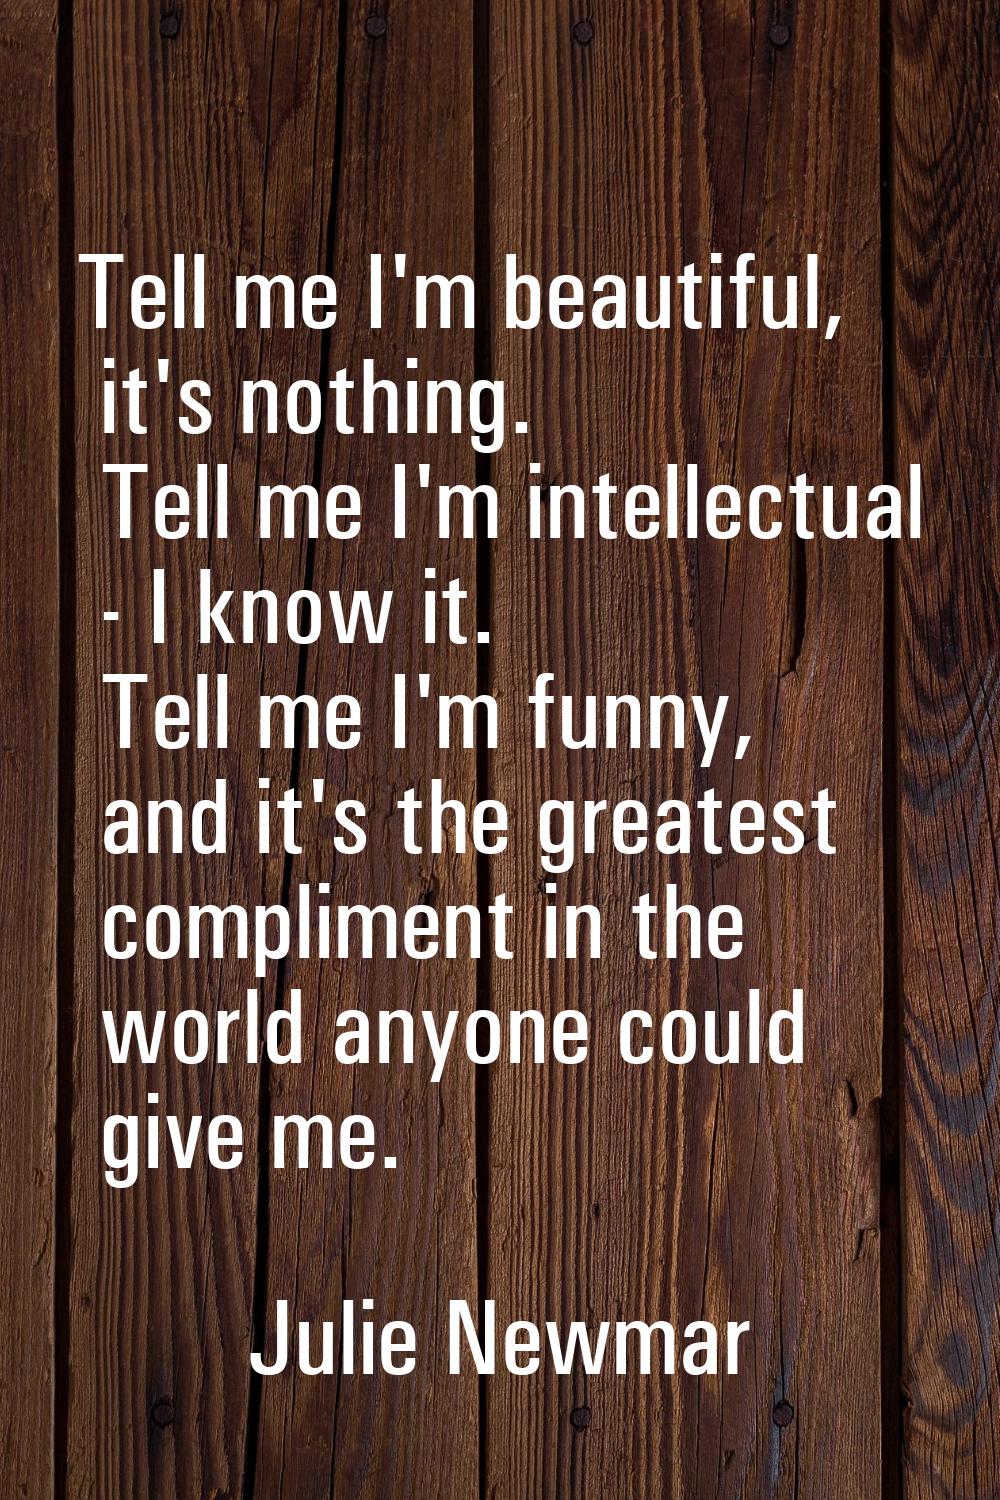 Tell me I'm beautiful, it's nothing. Tell me I'm intellectual - I know it. Tell me I'm funny, and i